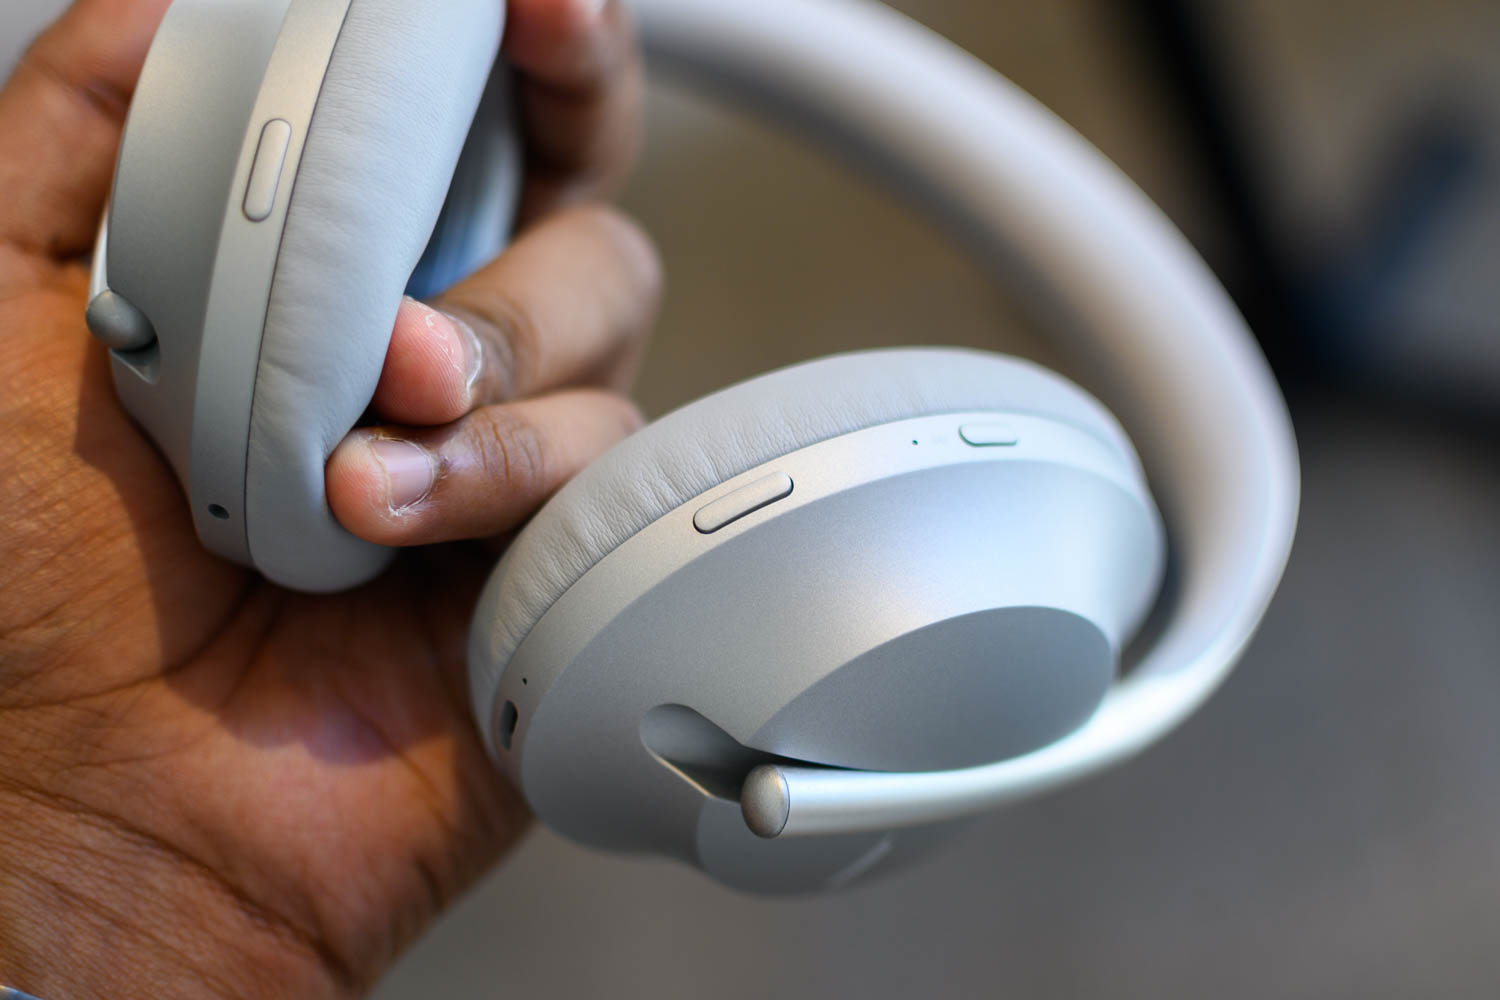 Bose 700 headphones review: The pursuit of perfection